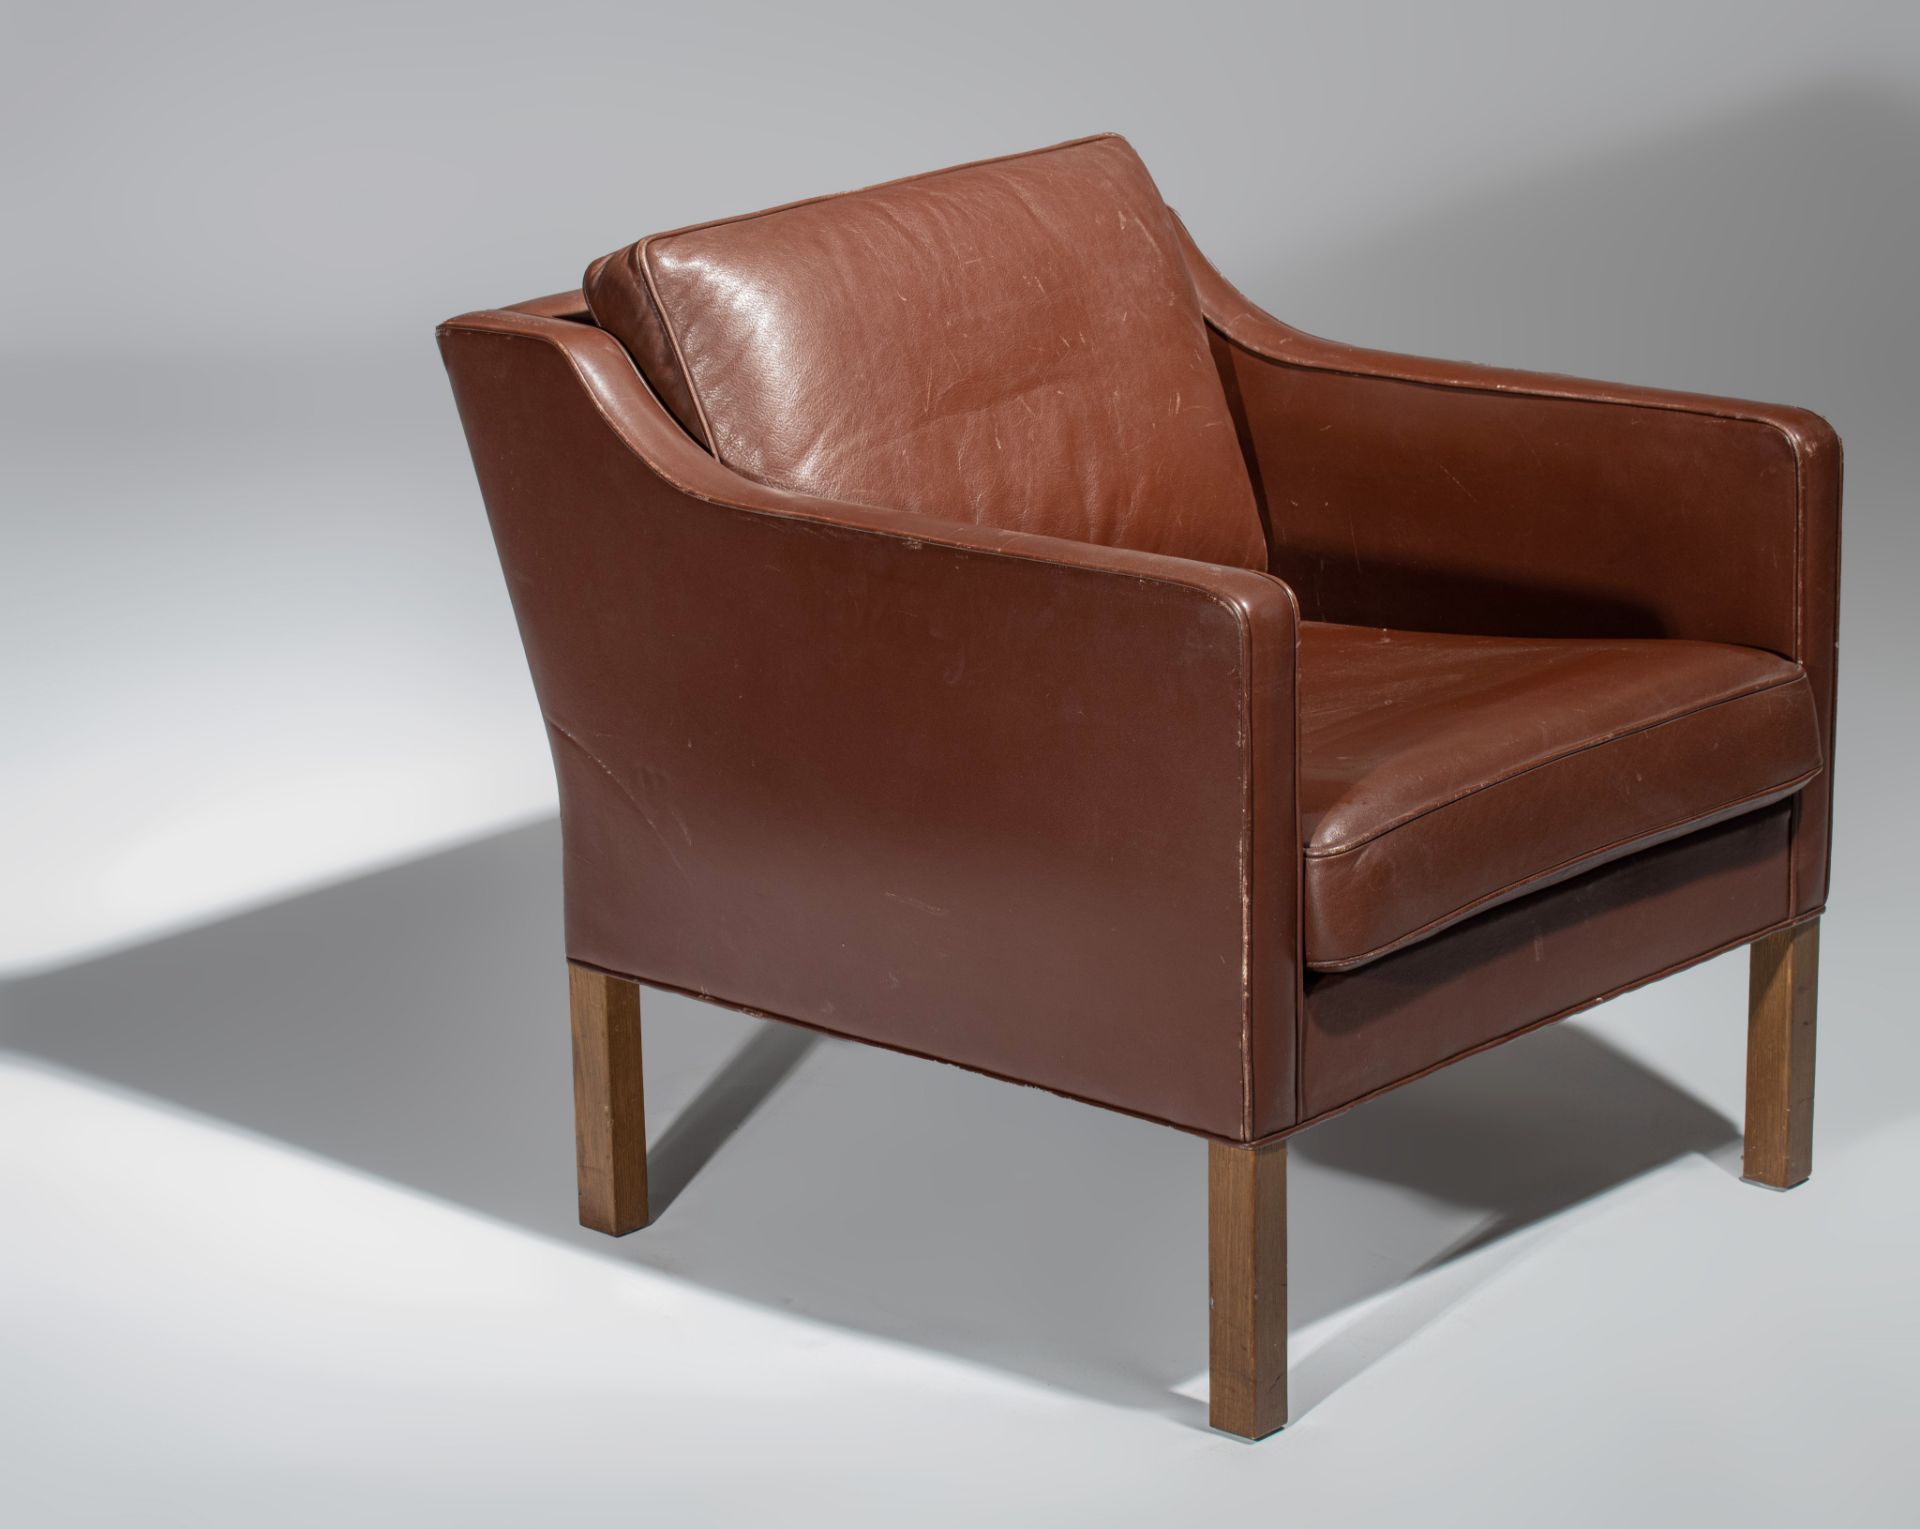 A brown leather armchair by Borge Mogensen for Ed Fredericia Stolefabrik, 1970, H 75 - W 71 cm - Image 2 of 13